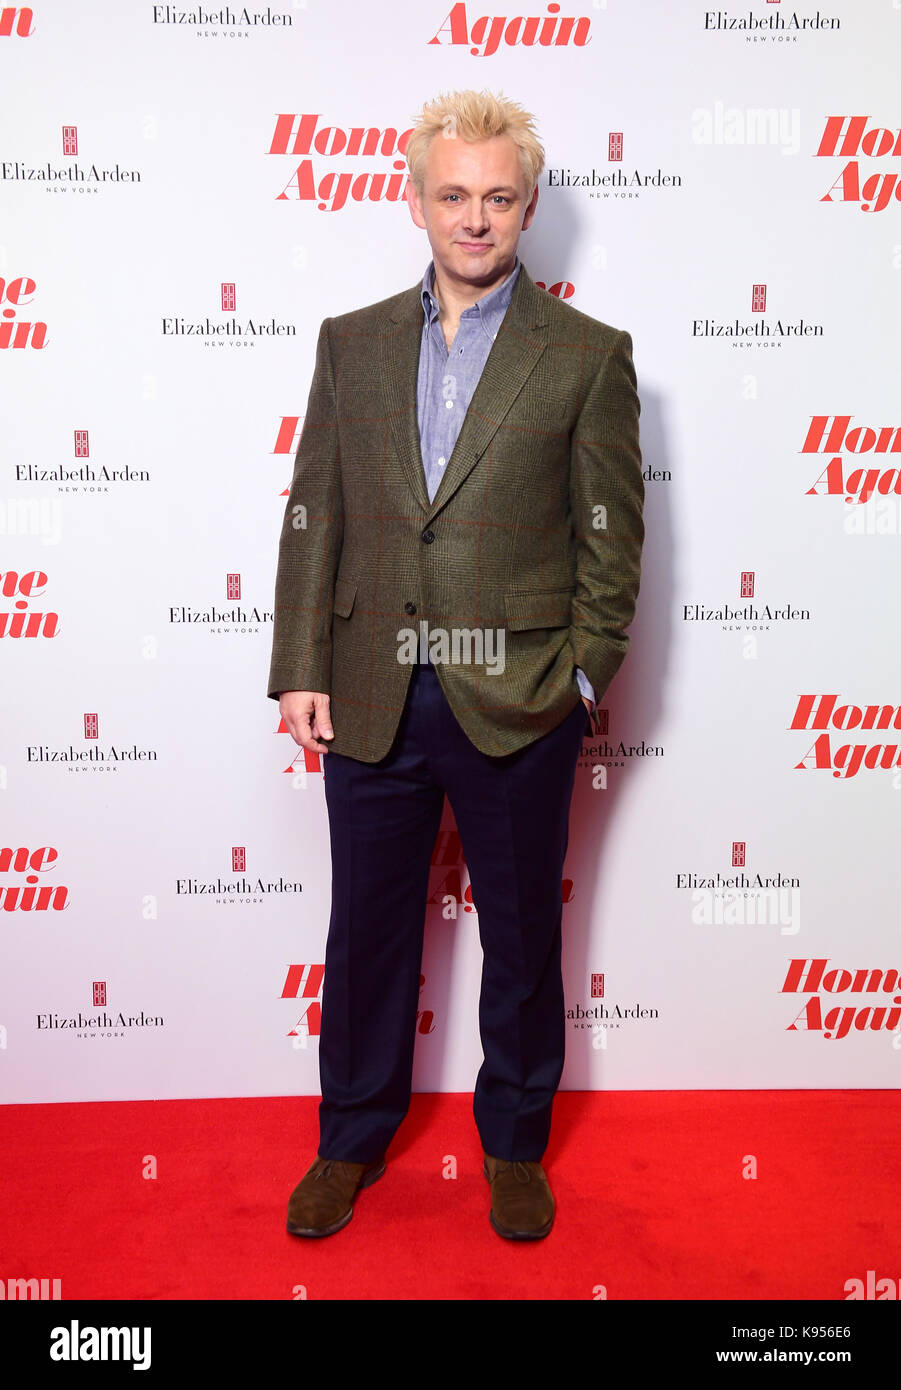 Michael Sheen attending a screening of Home Again in London. Picture Date: Thursday 21 September. Photo credit should read: Ian West/PA Wire Stock Photo